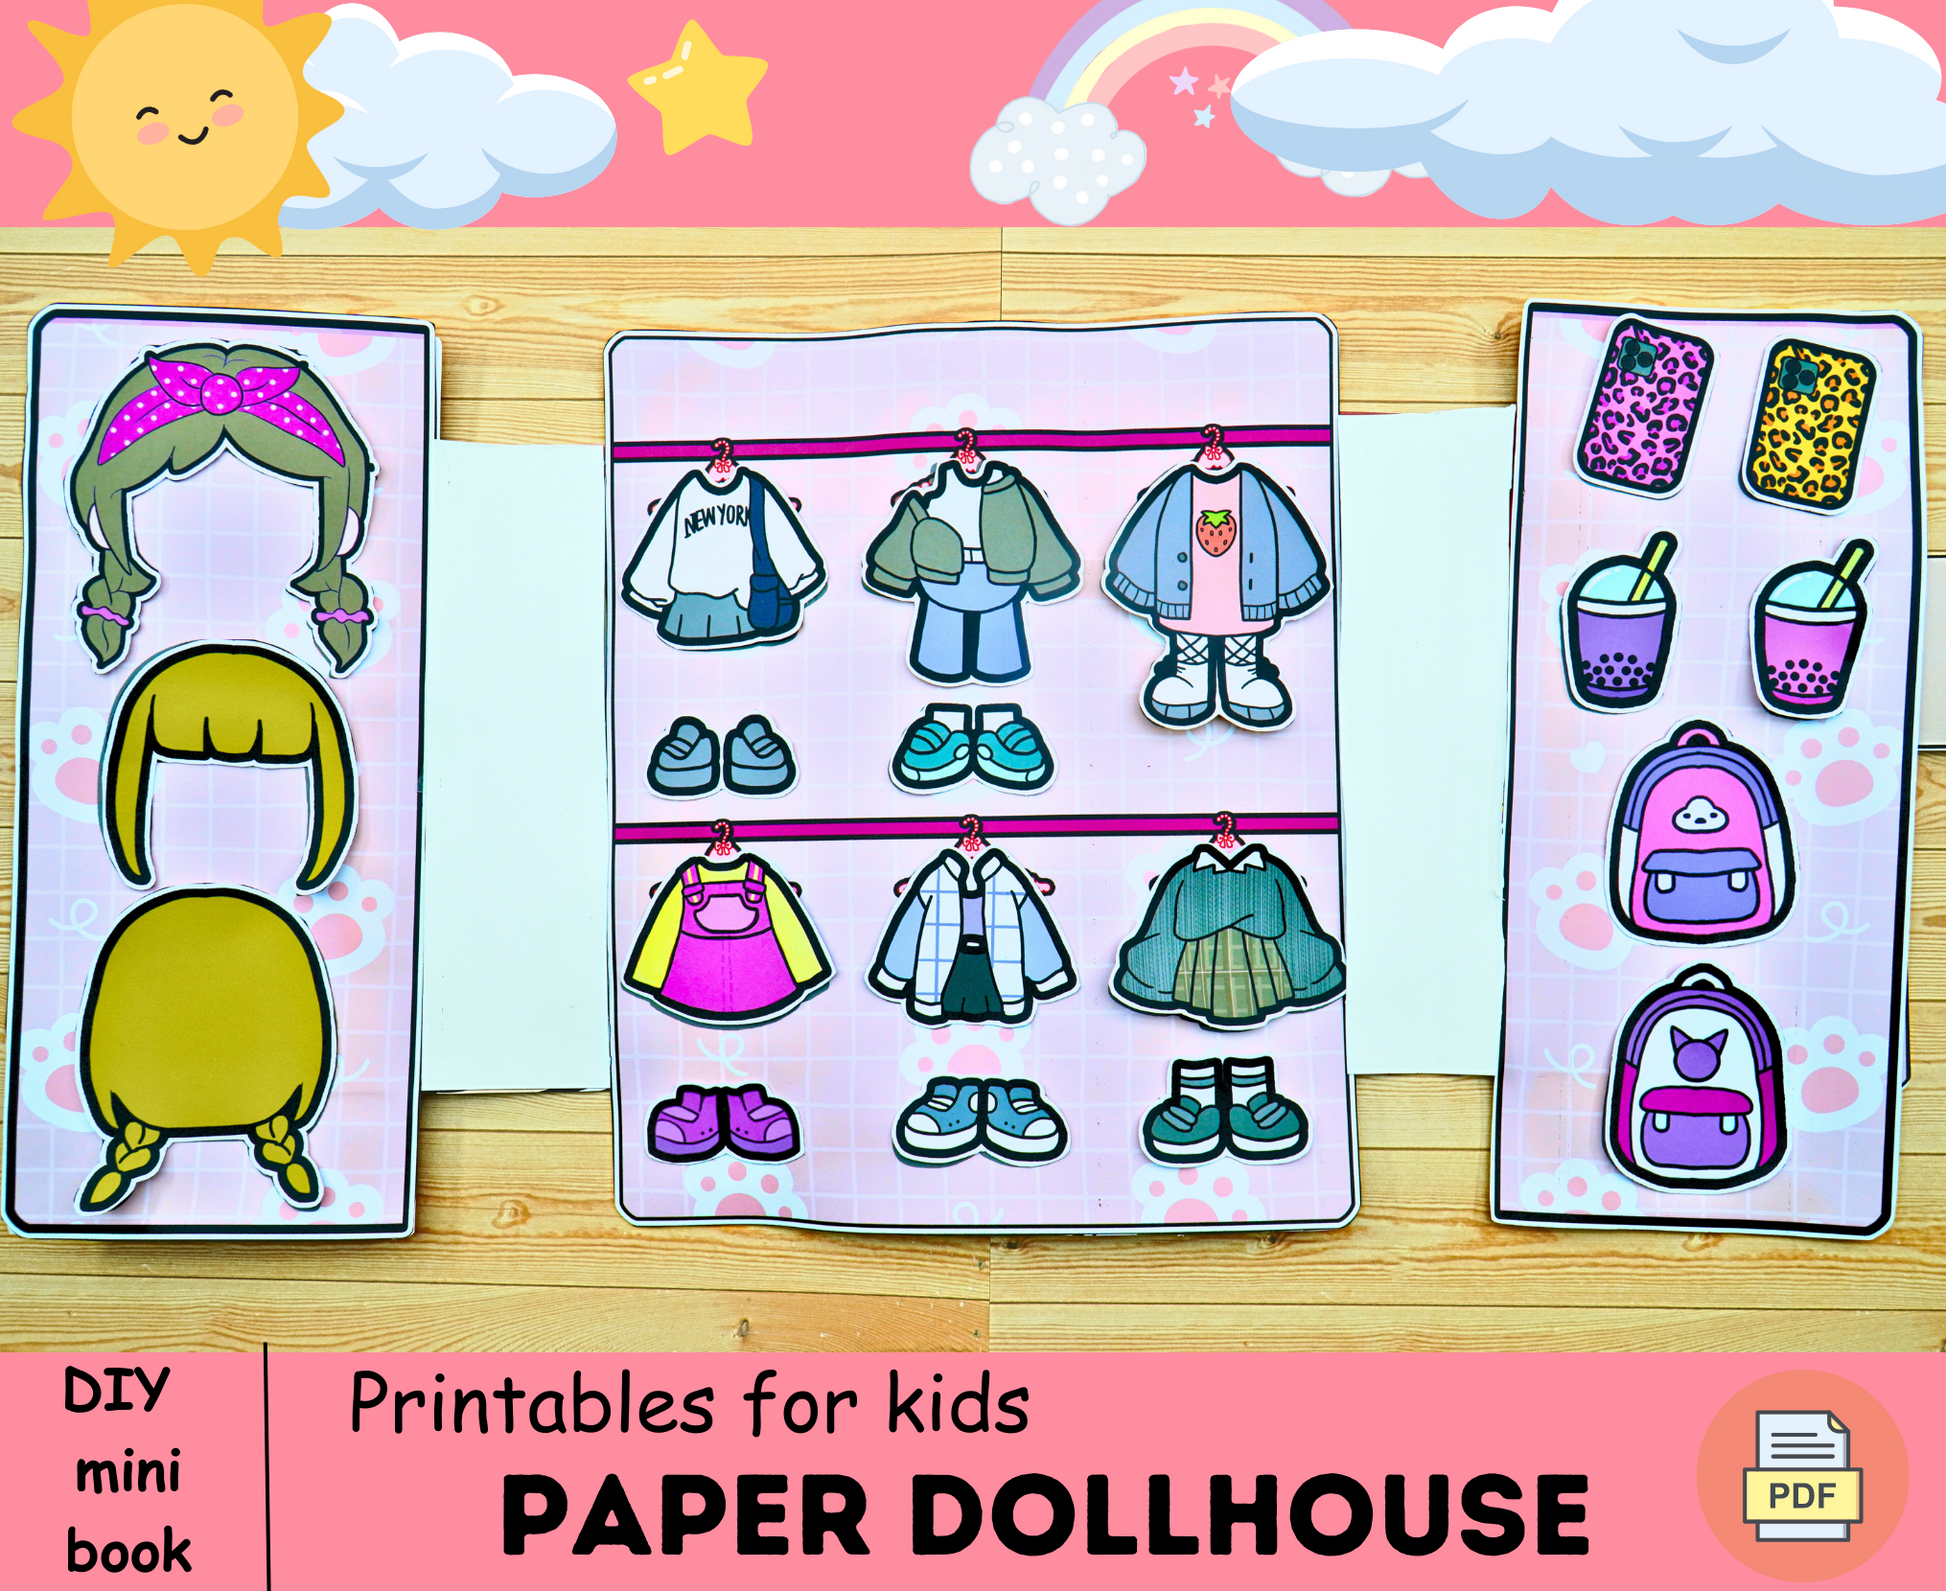 Printable Toca Boca Paper Doll and Clothes Activities for Kids